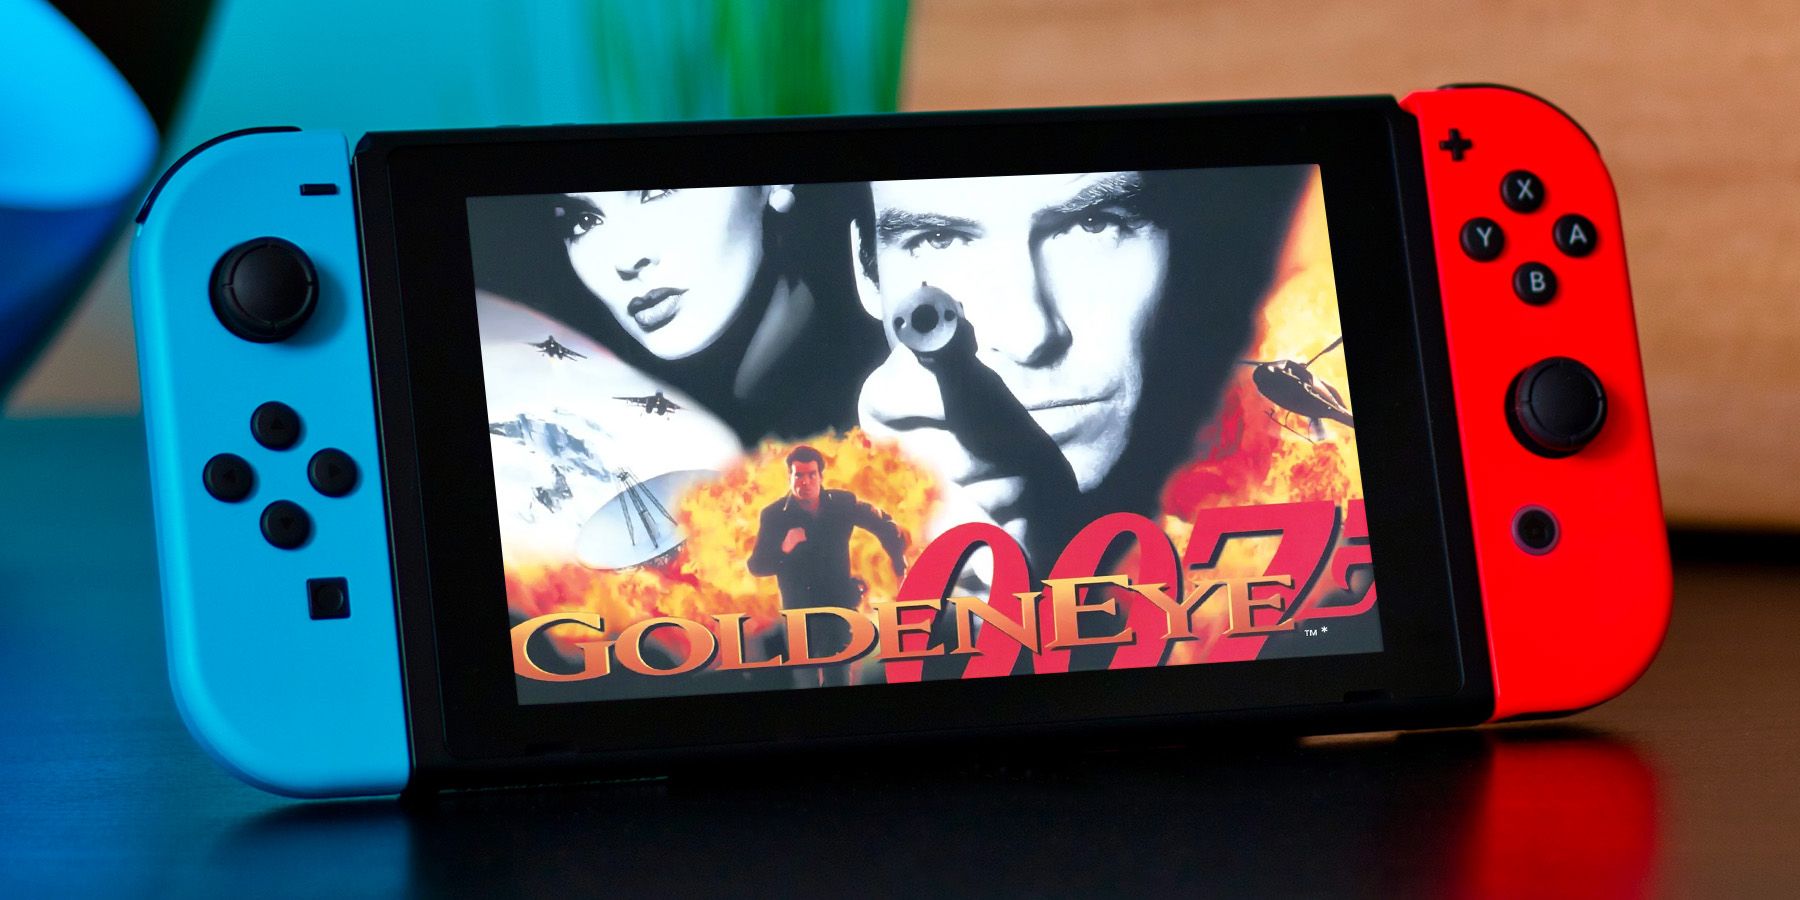 goldeneye-007-nintendo-switch-red-and-blue